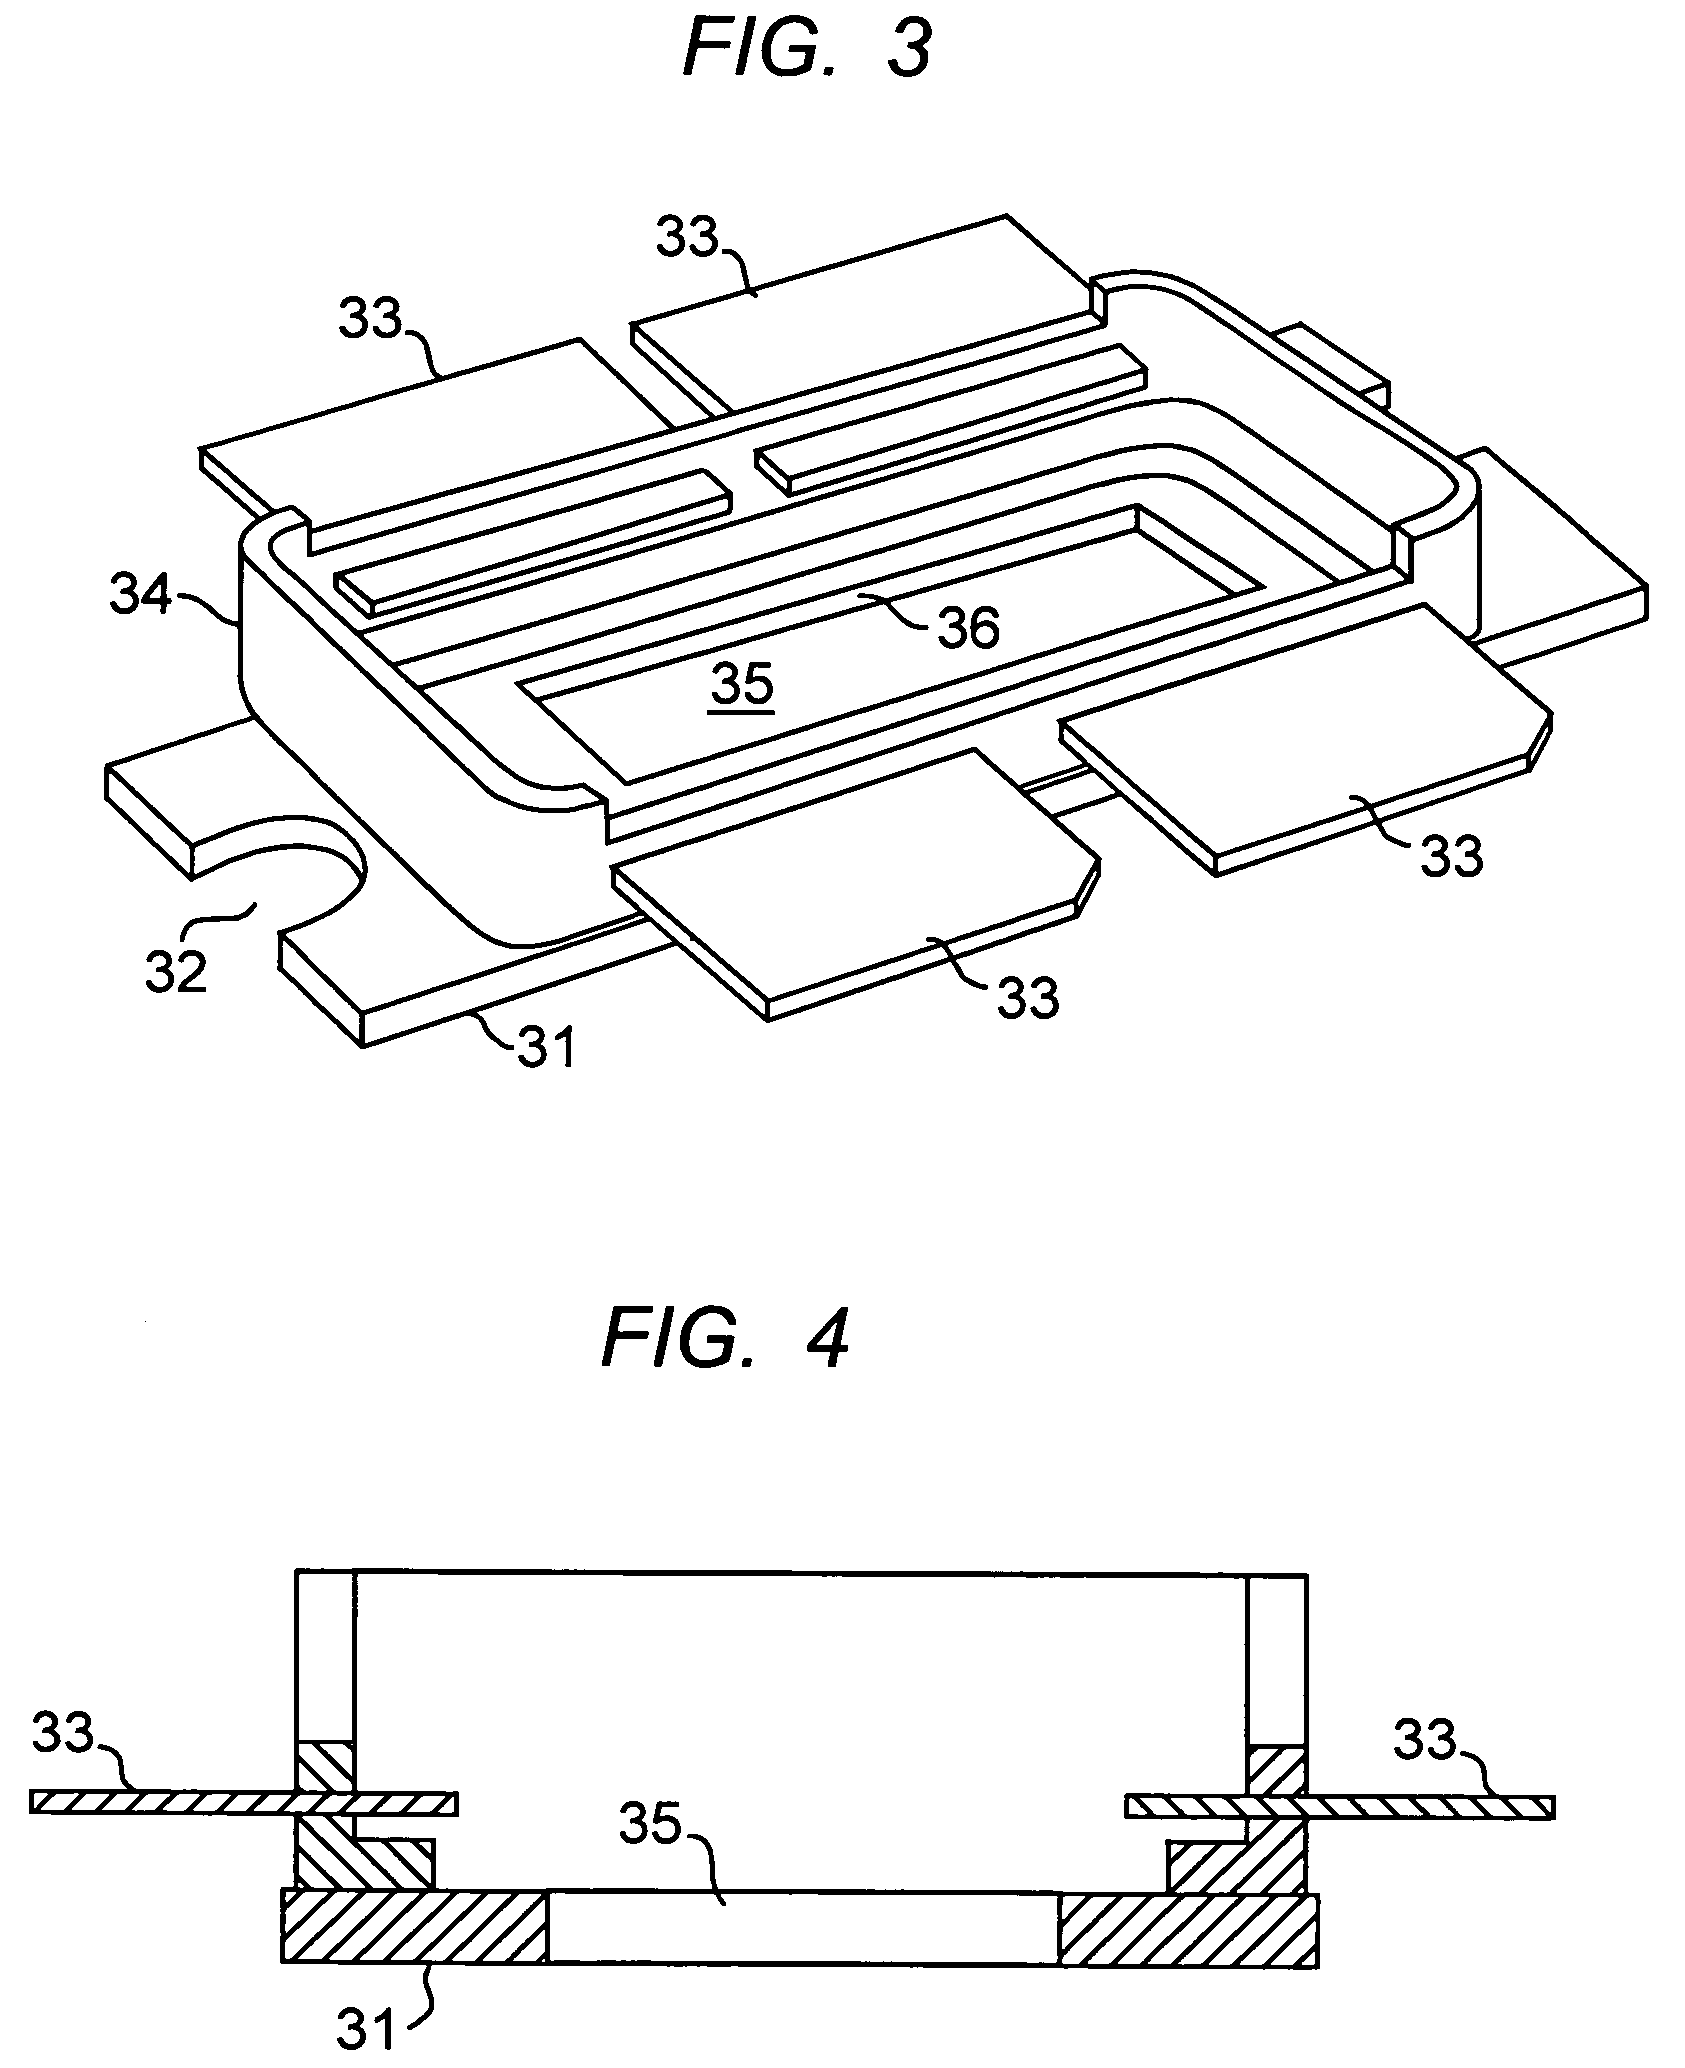 Leadframe designs for integrated circuit plastic packages